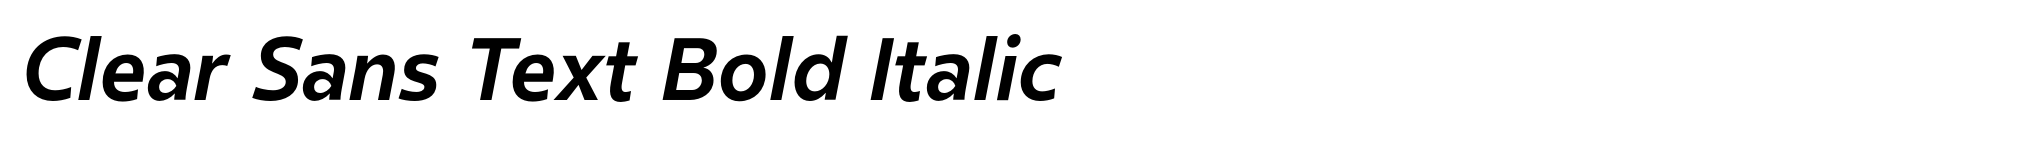 Clear Sans Text Bold Italic image